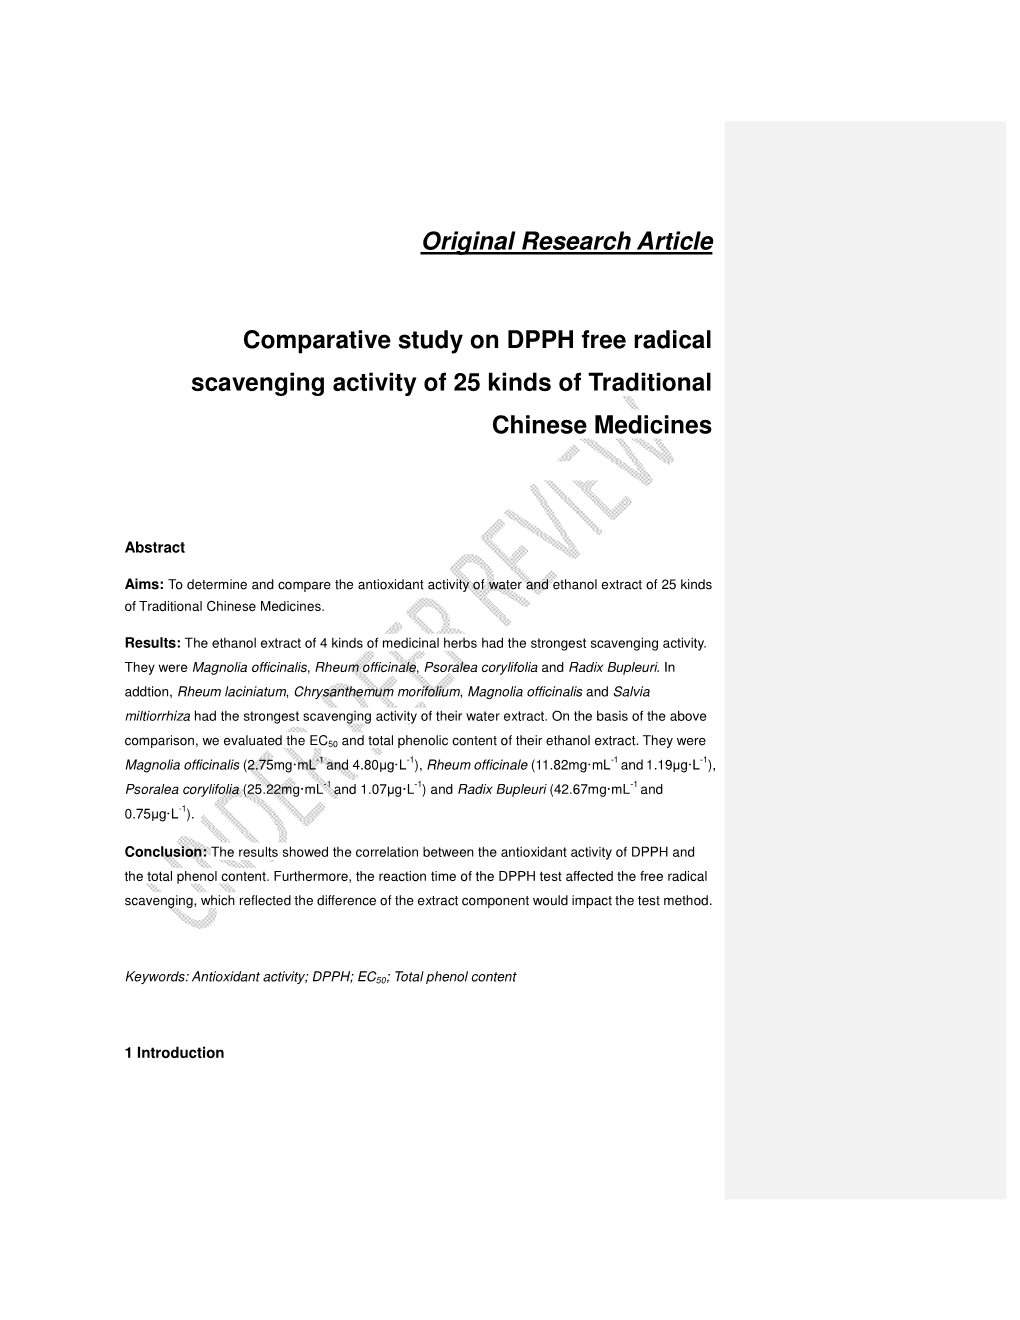 Original Research Article Comparative Study on DPPH Free Radical